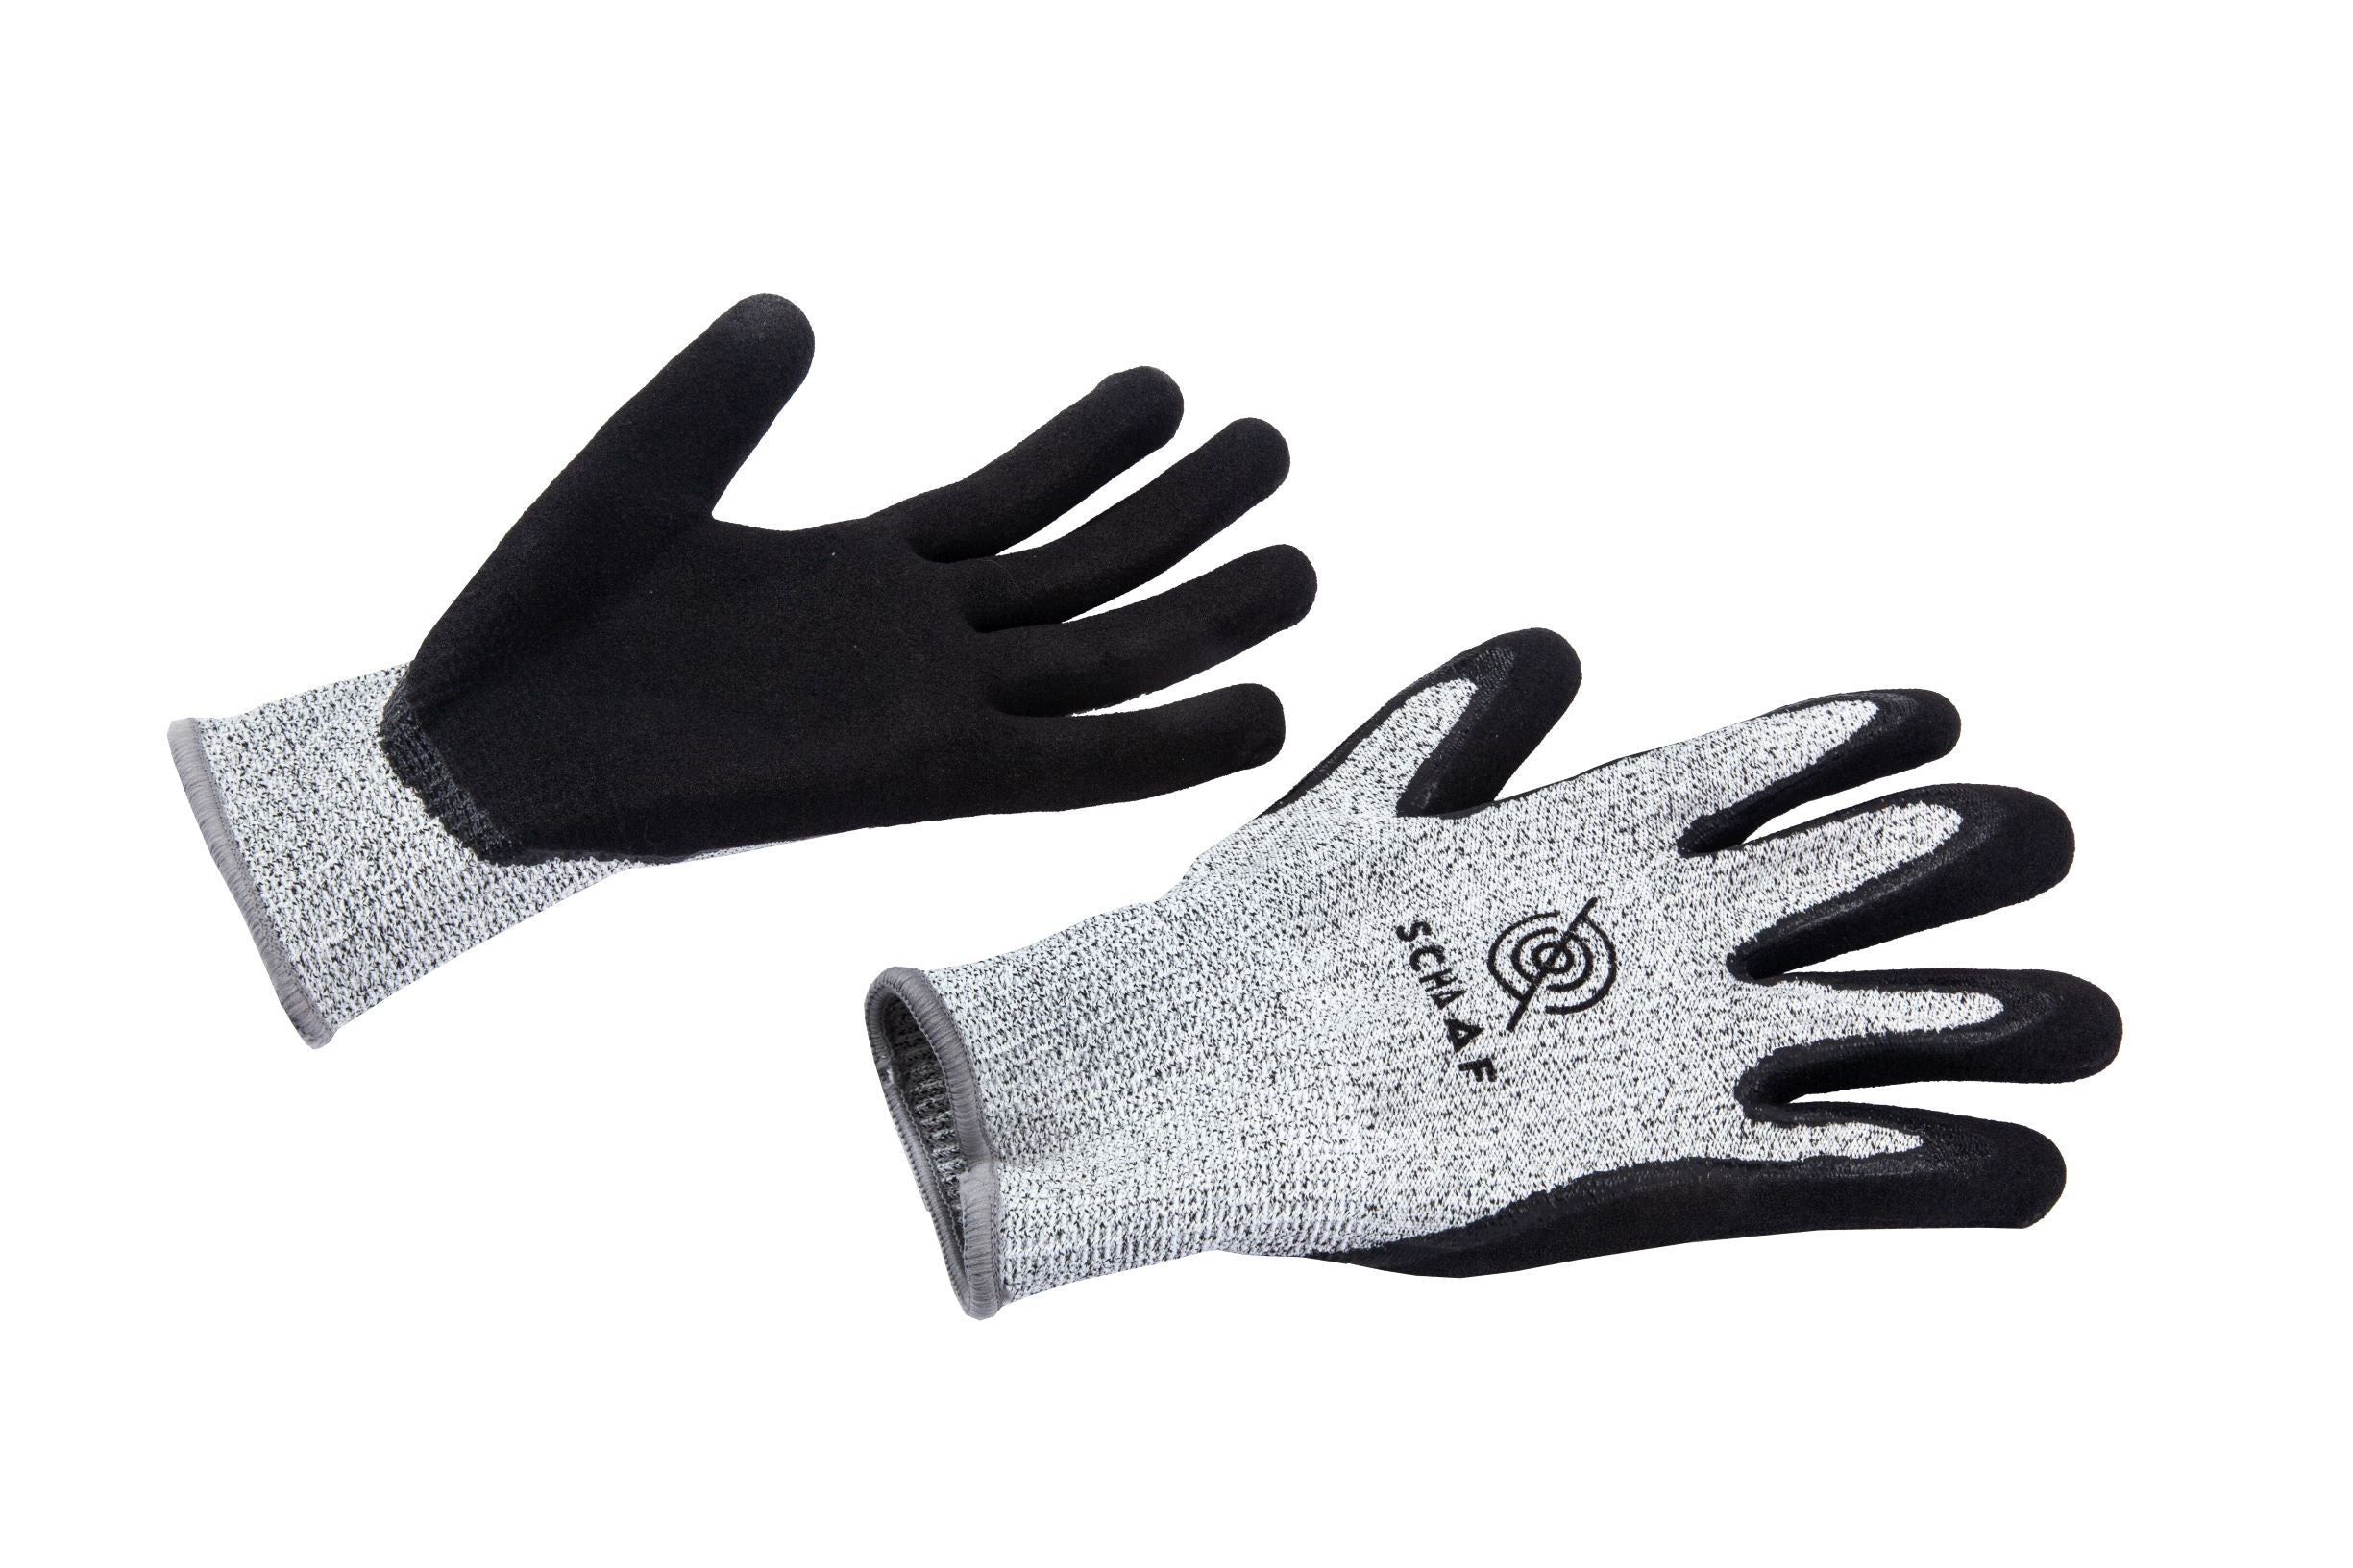 Protective Cut Resistant Gloves for Cutting Meat Wood Carving